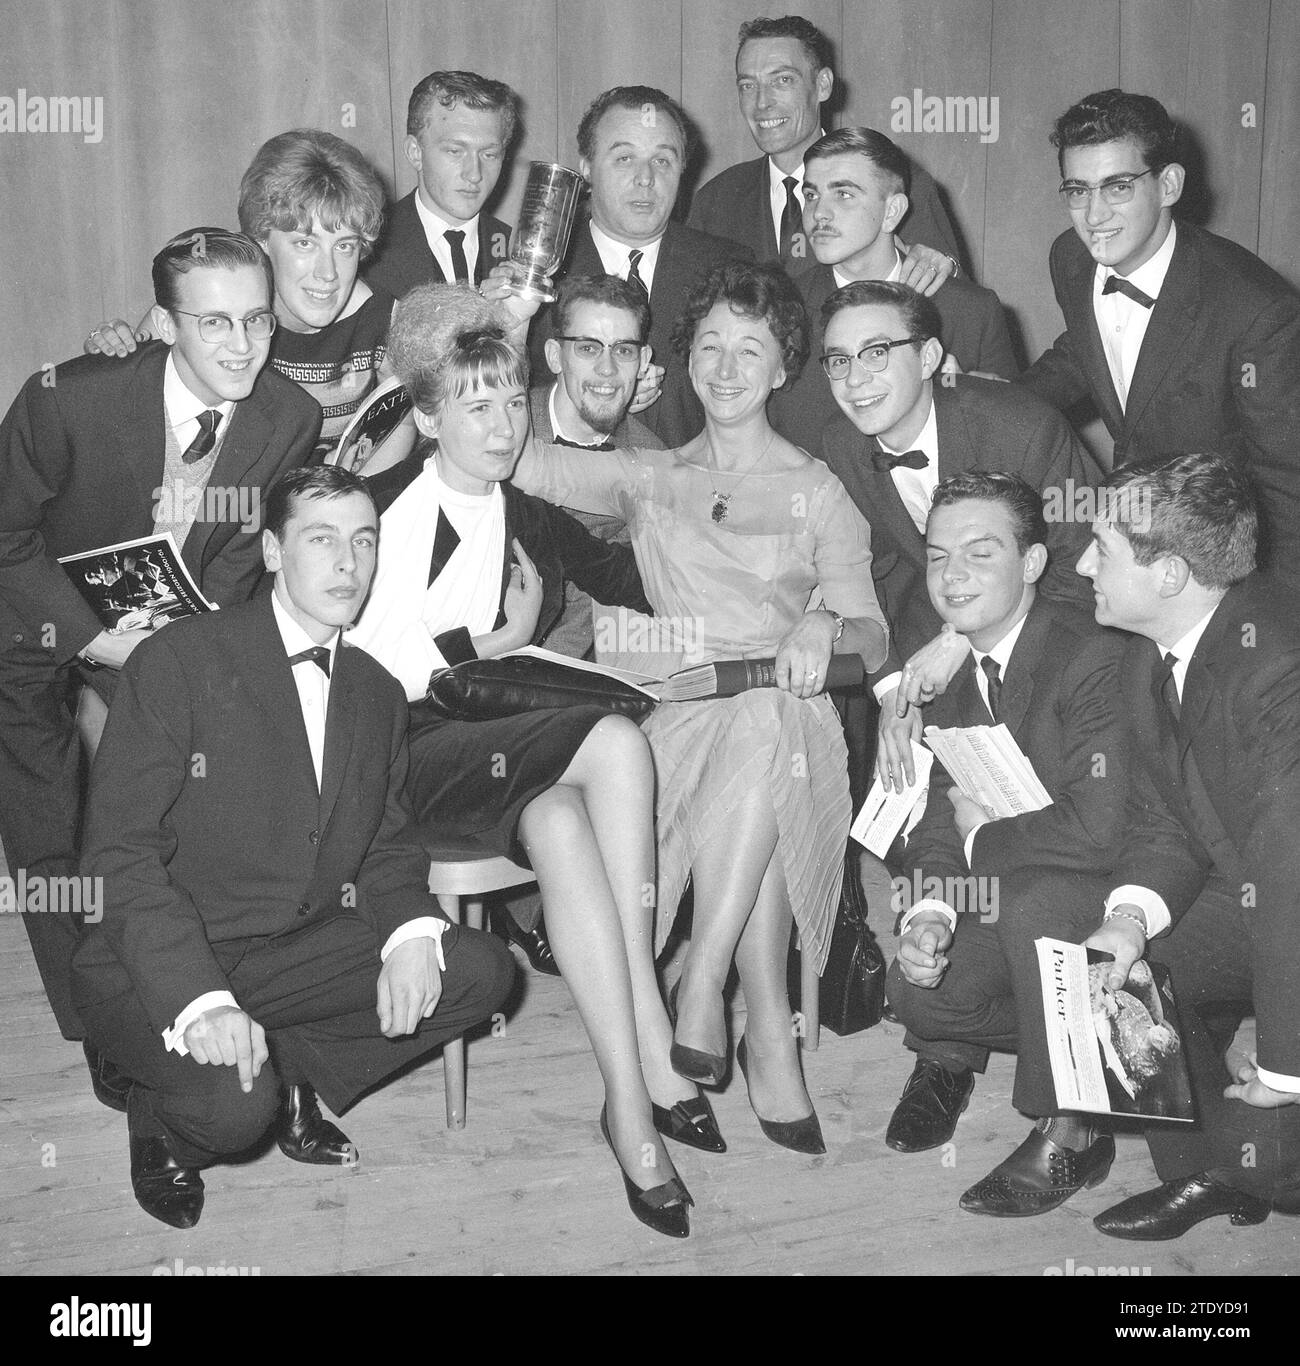 Closing evening Inter-capital drama competition in Spinoza-Lyceum, the Belgian group from Brussels who received the first prize ca. December 20, 1962 Stock Photo